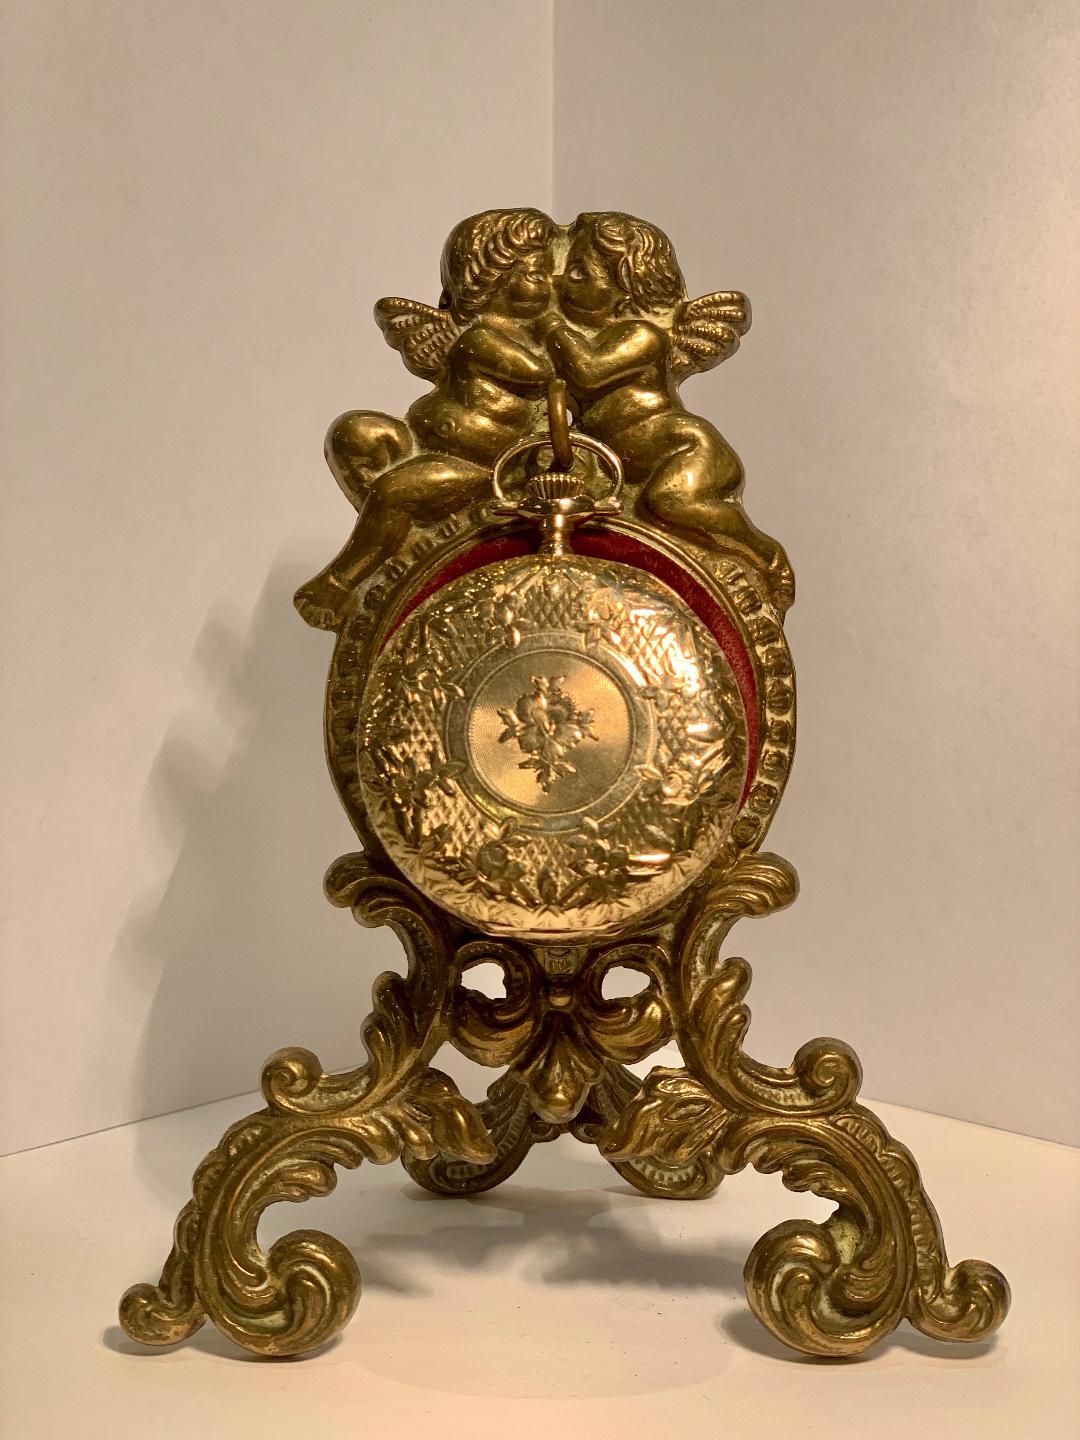 Beautifully handcrafted antique display stand or porte montre from which to hang a pocket watch features an ornate, baroque scrolling motif antique gold finish metal frame with a pair of loving cherubs on top and a burgundy velvet circular cushion